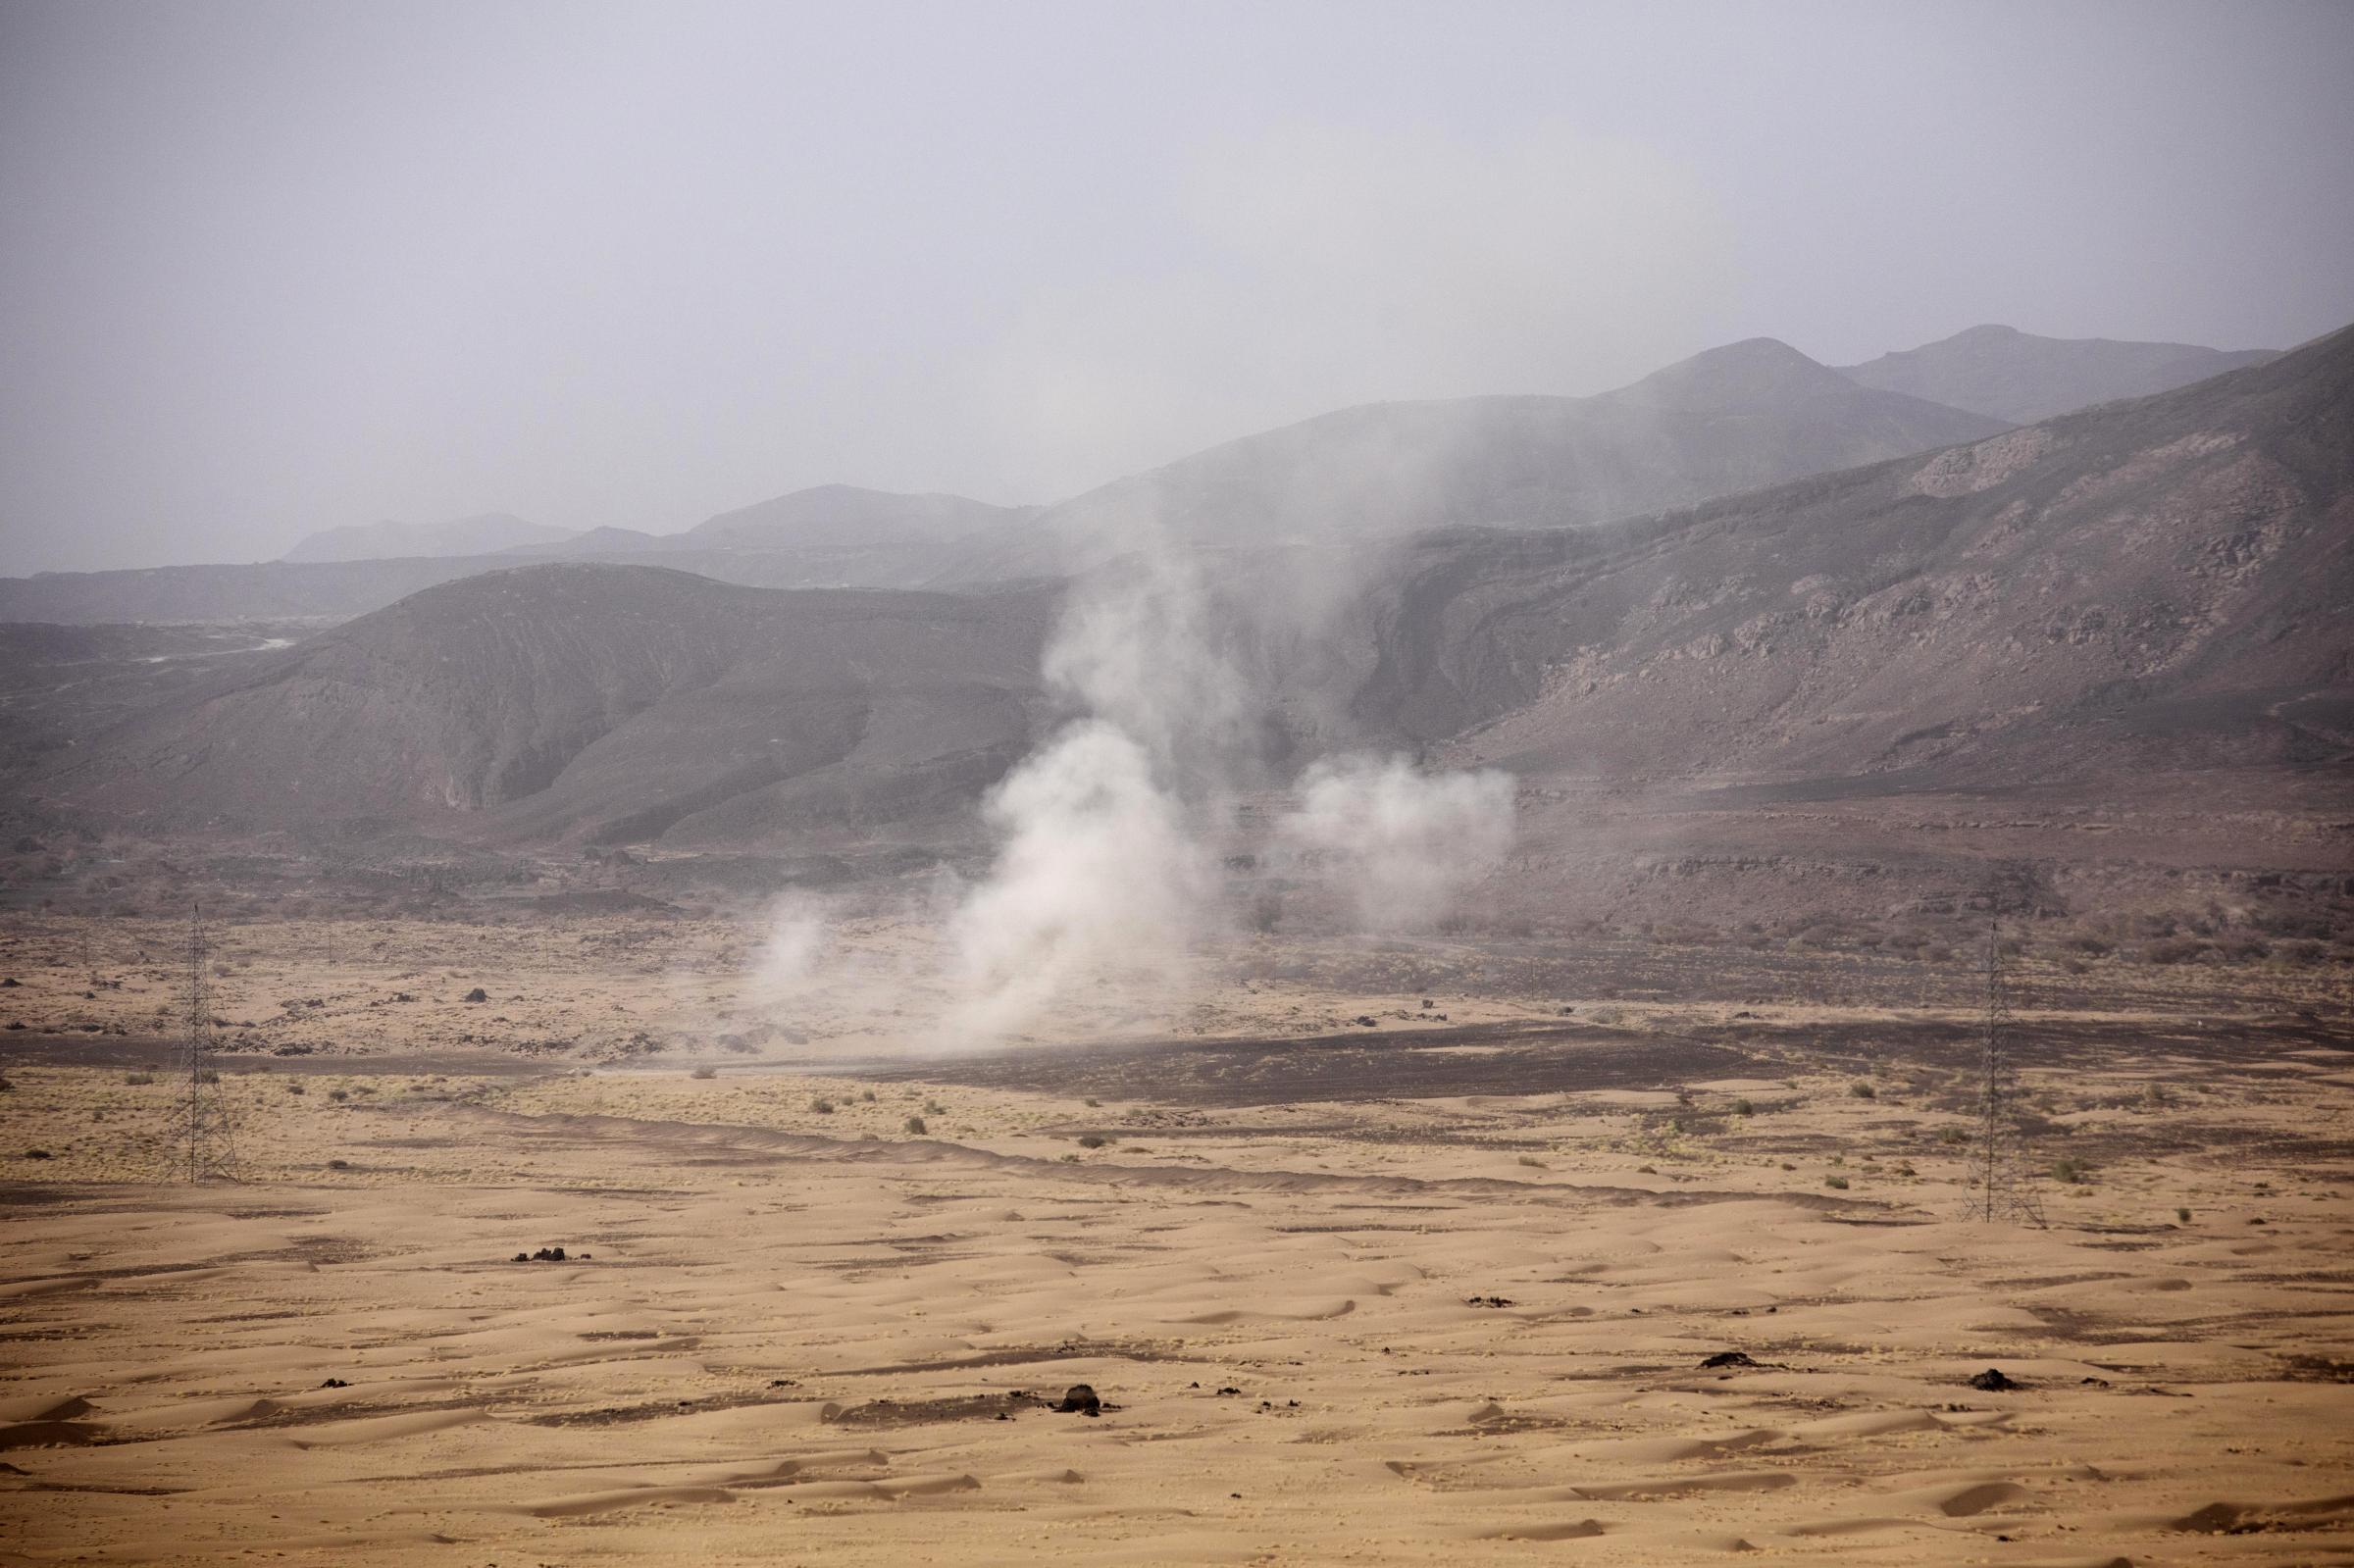 Battle for key city Marib intensifies -  Smoke rises from a Houthi missile attack near the...